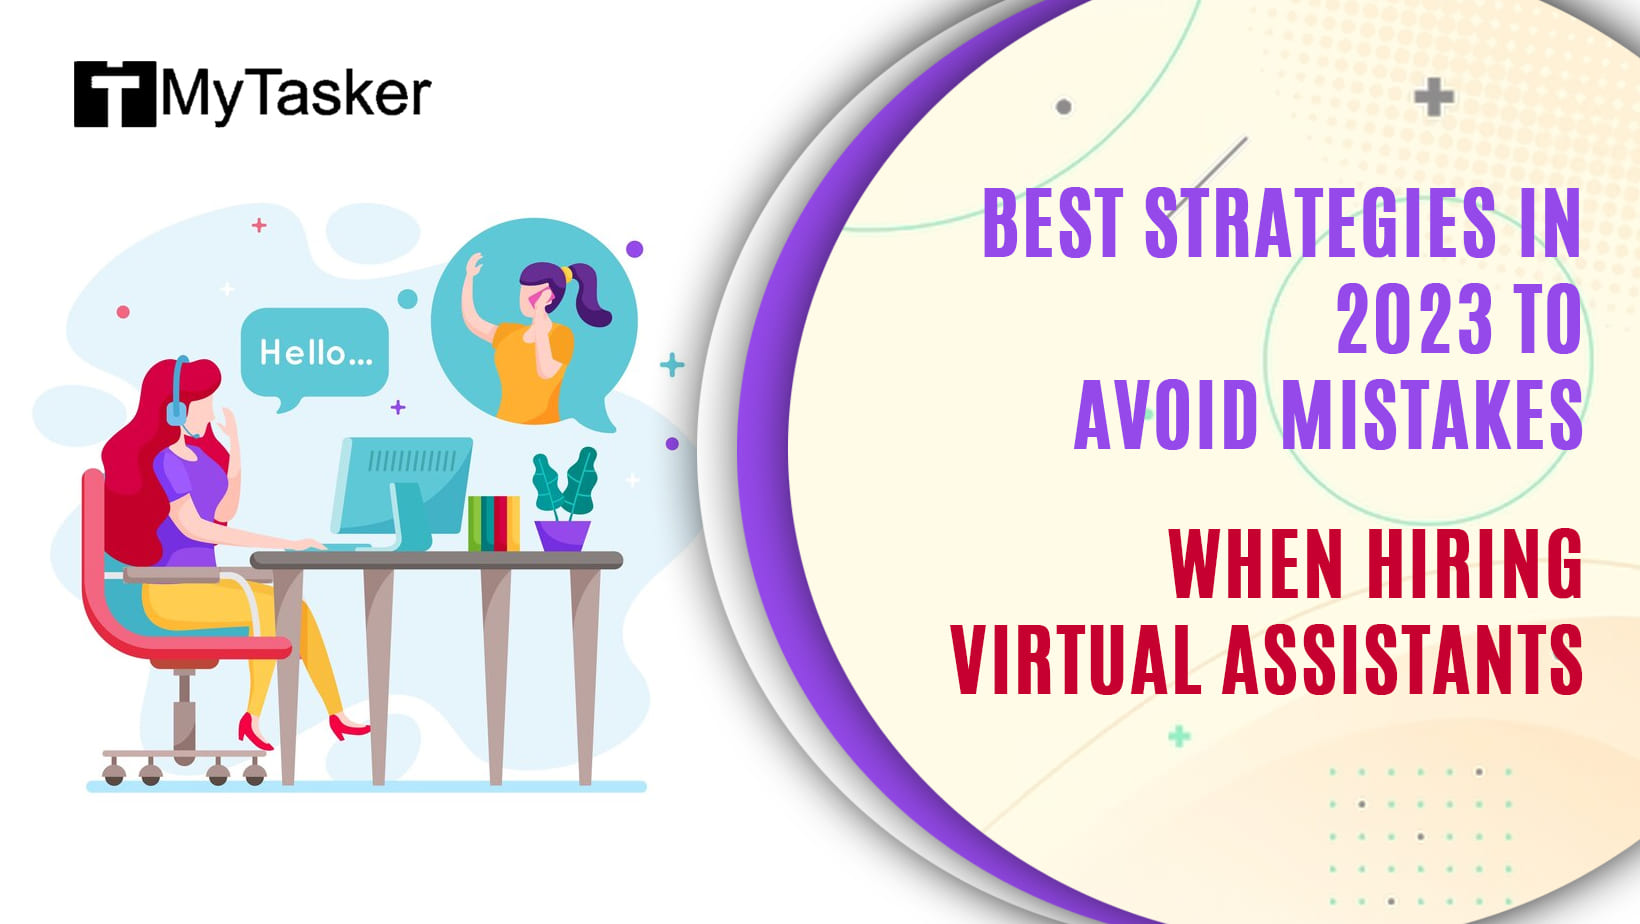 Best Strategies in 2023 To Avoid Mistakes When Hiring Virtual Assistants